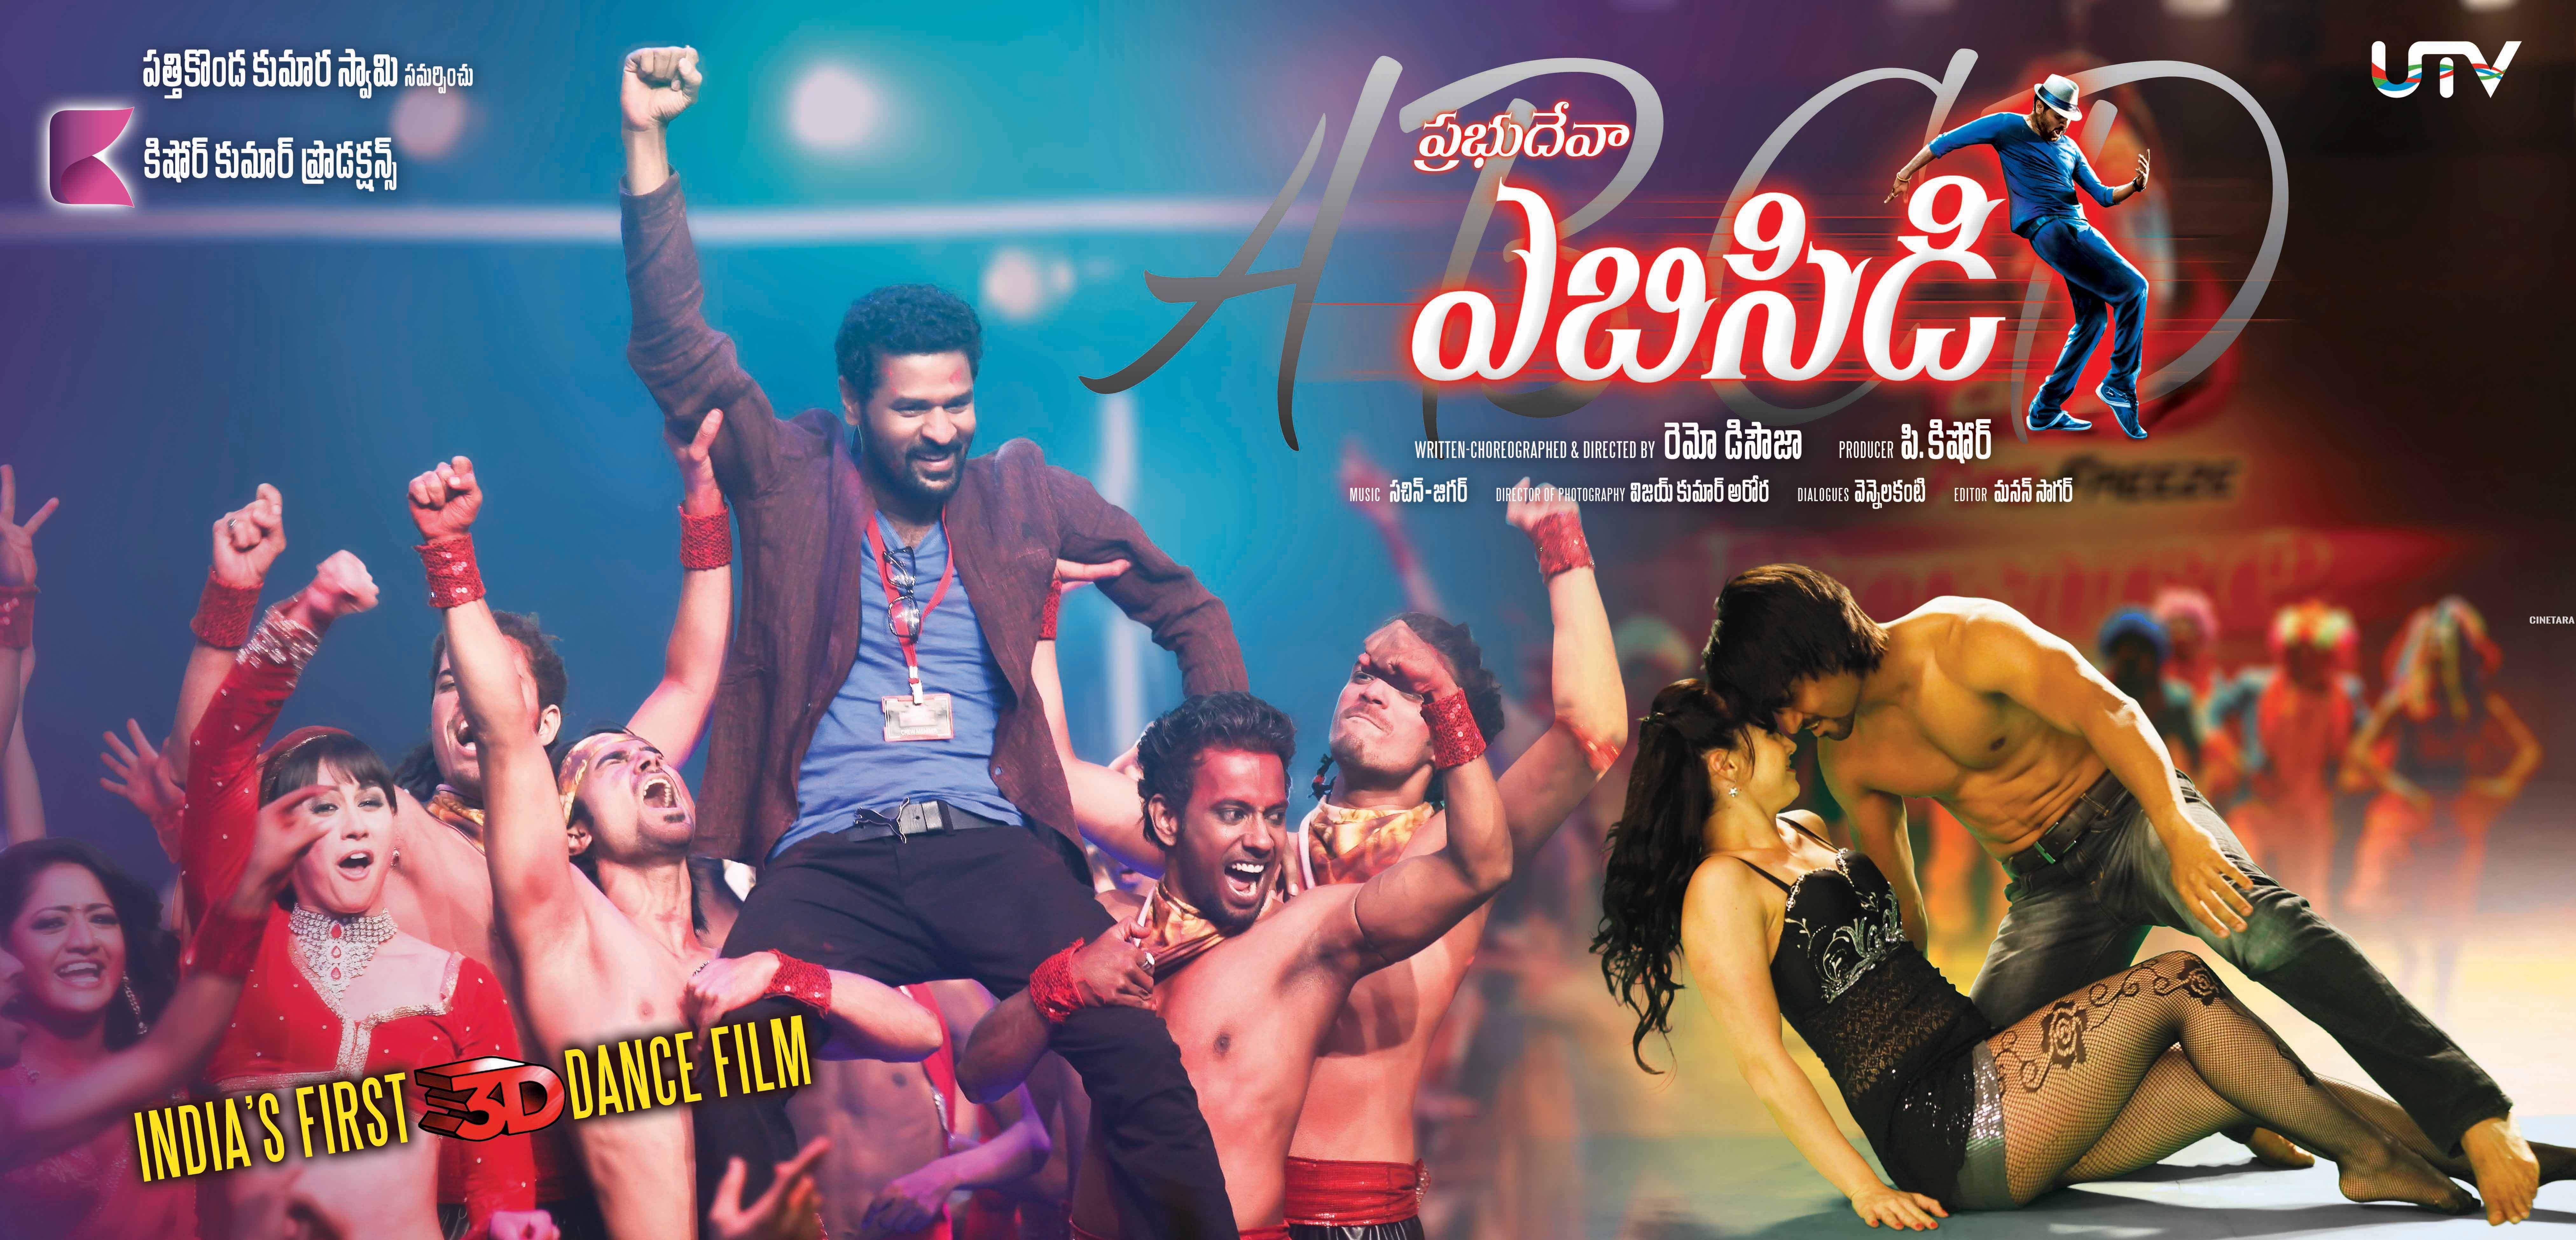 Abcd Tamil Dubbed Movie Free Download